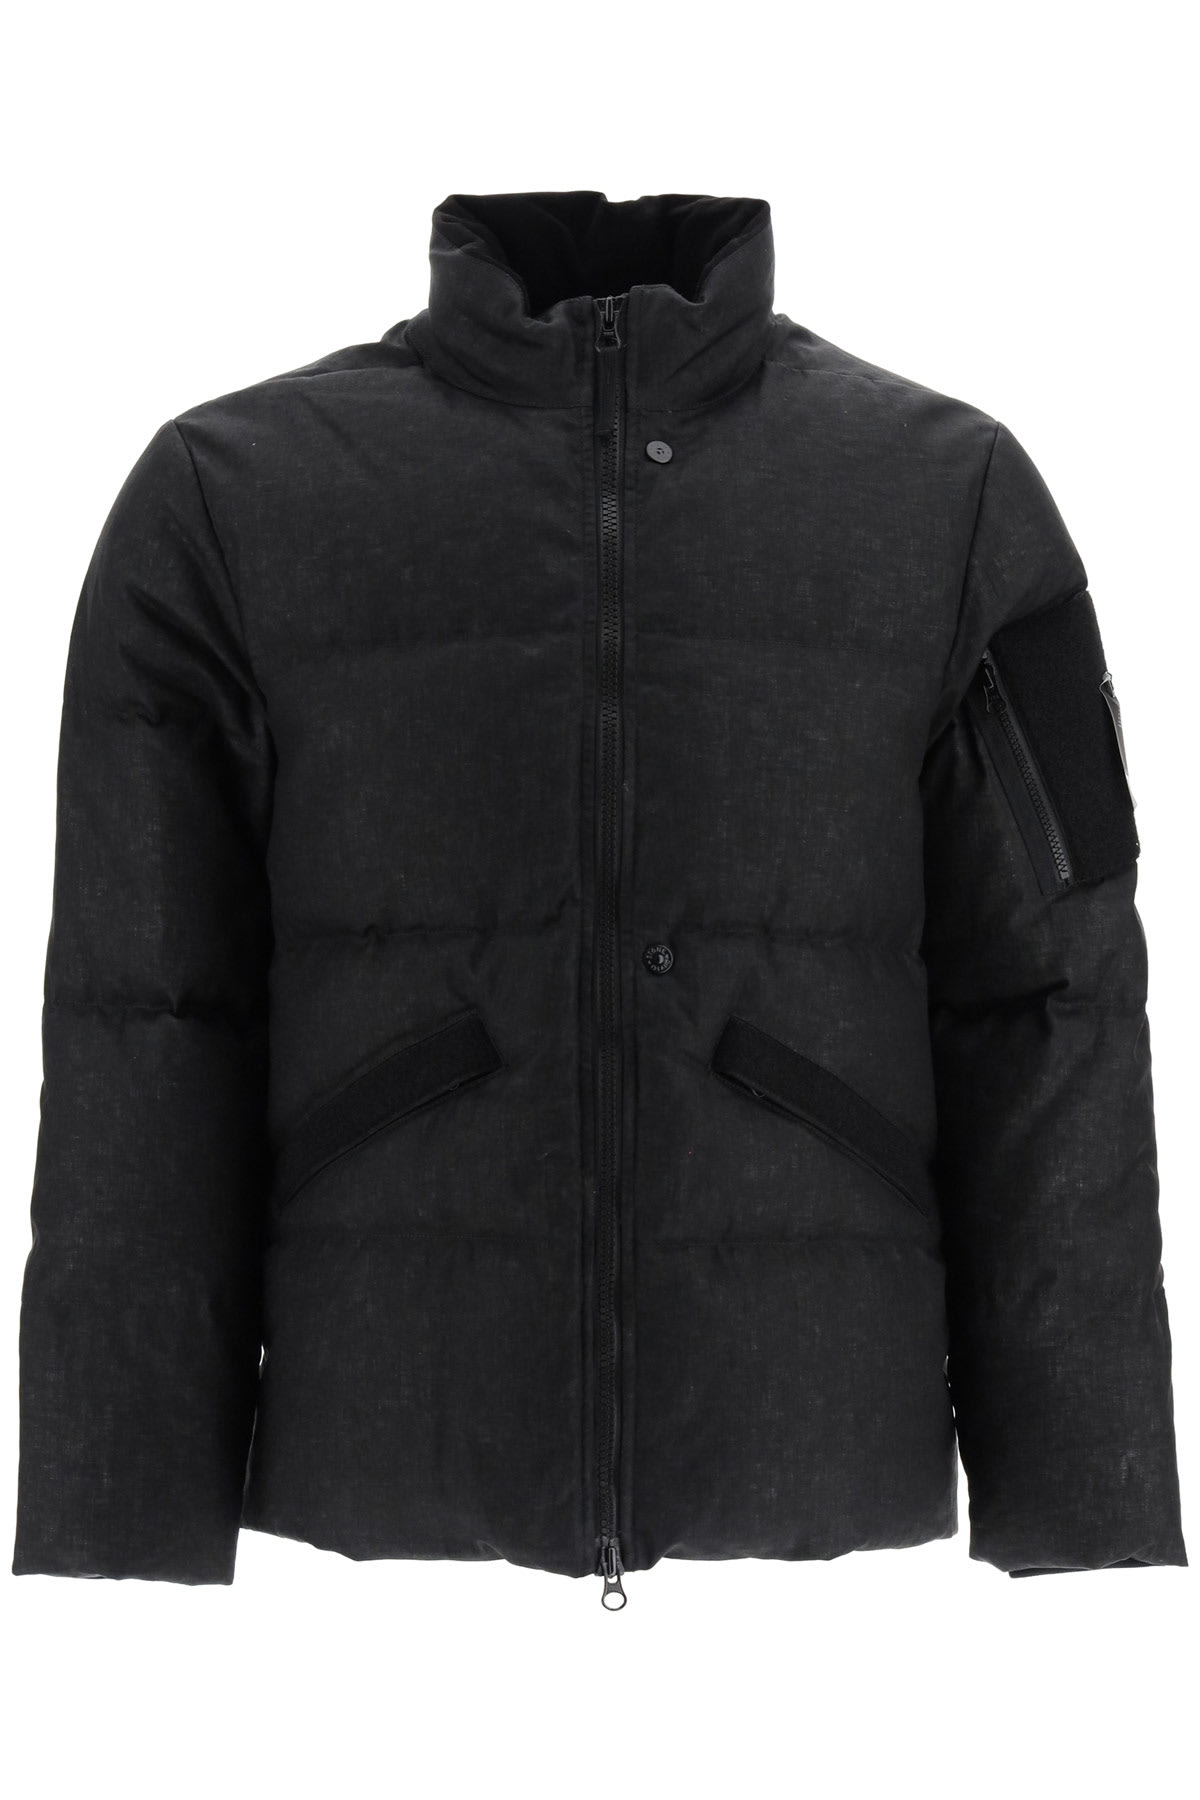 Stone Island Shadow Project Down Vest-jacket In Cotton Poplin And Nylon